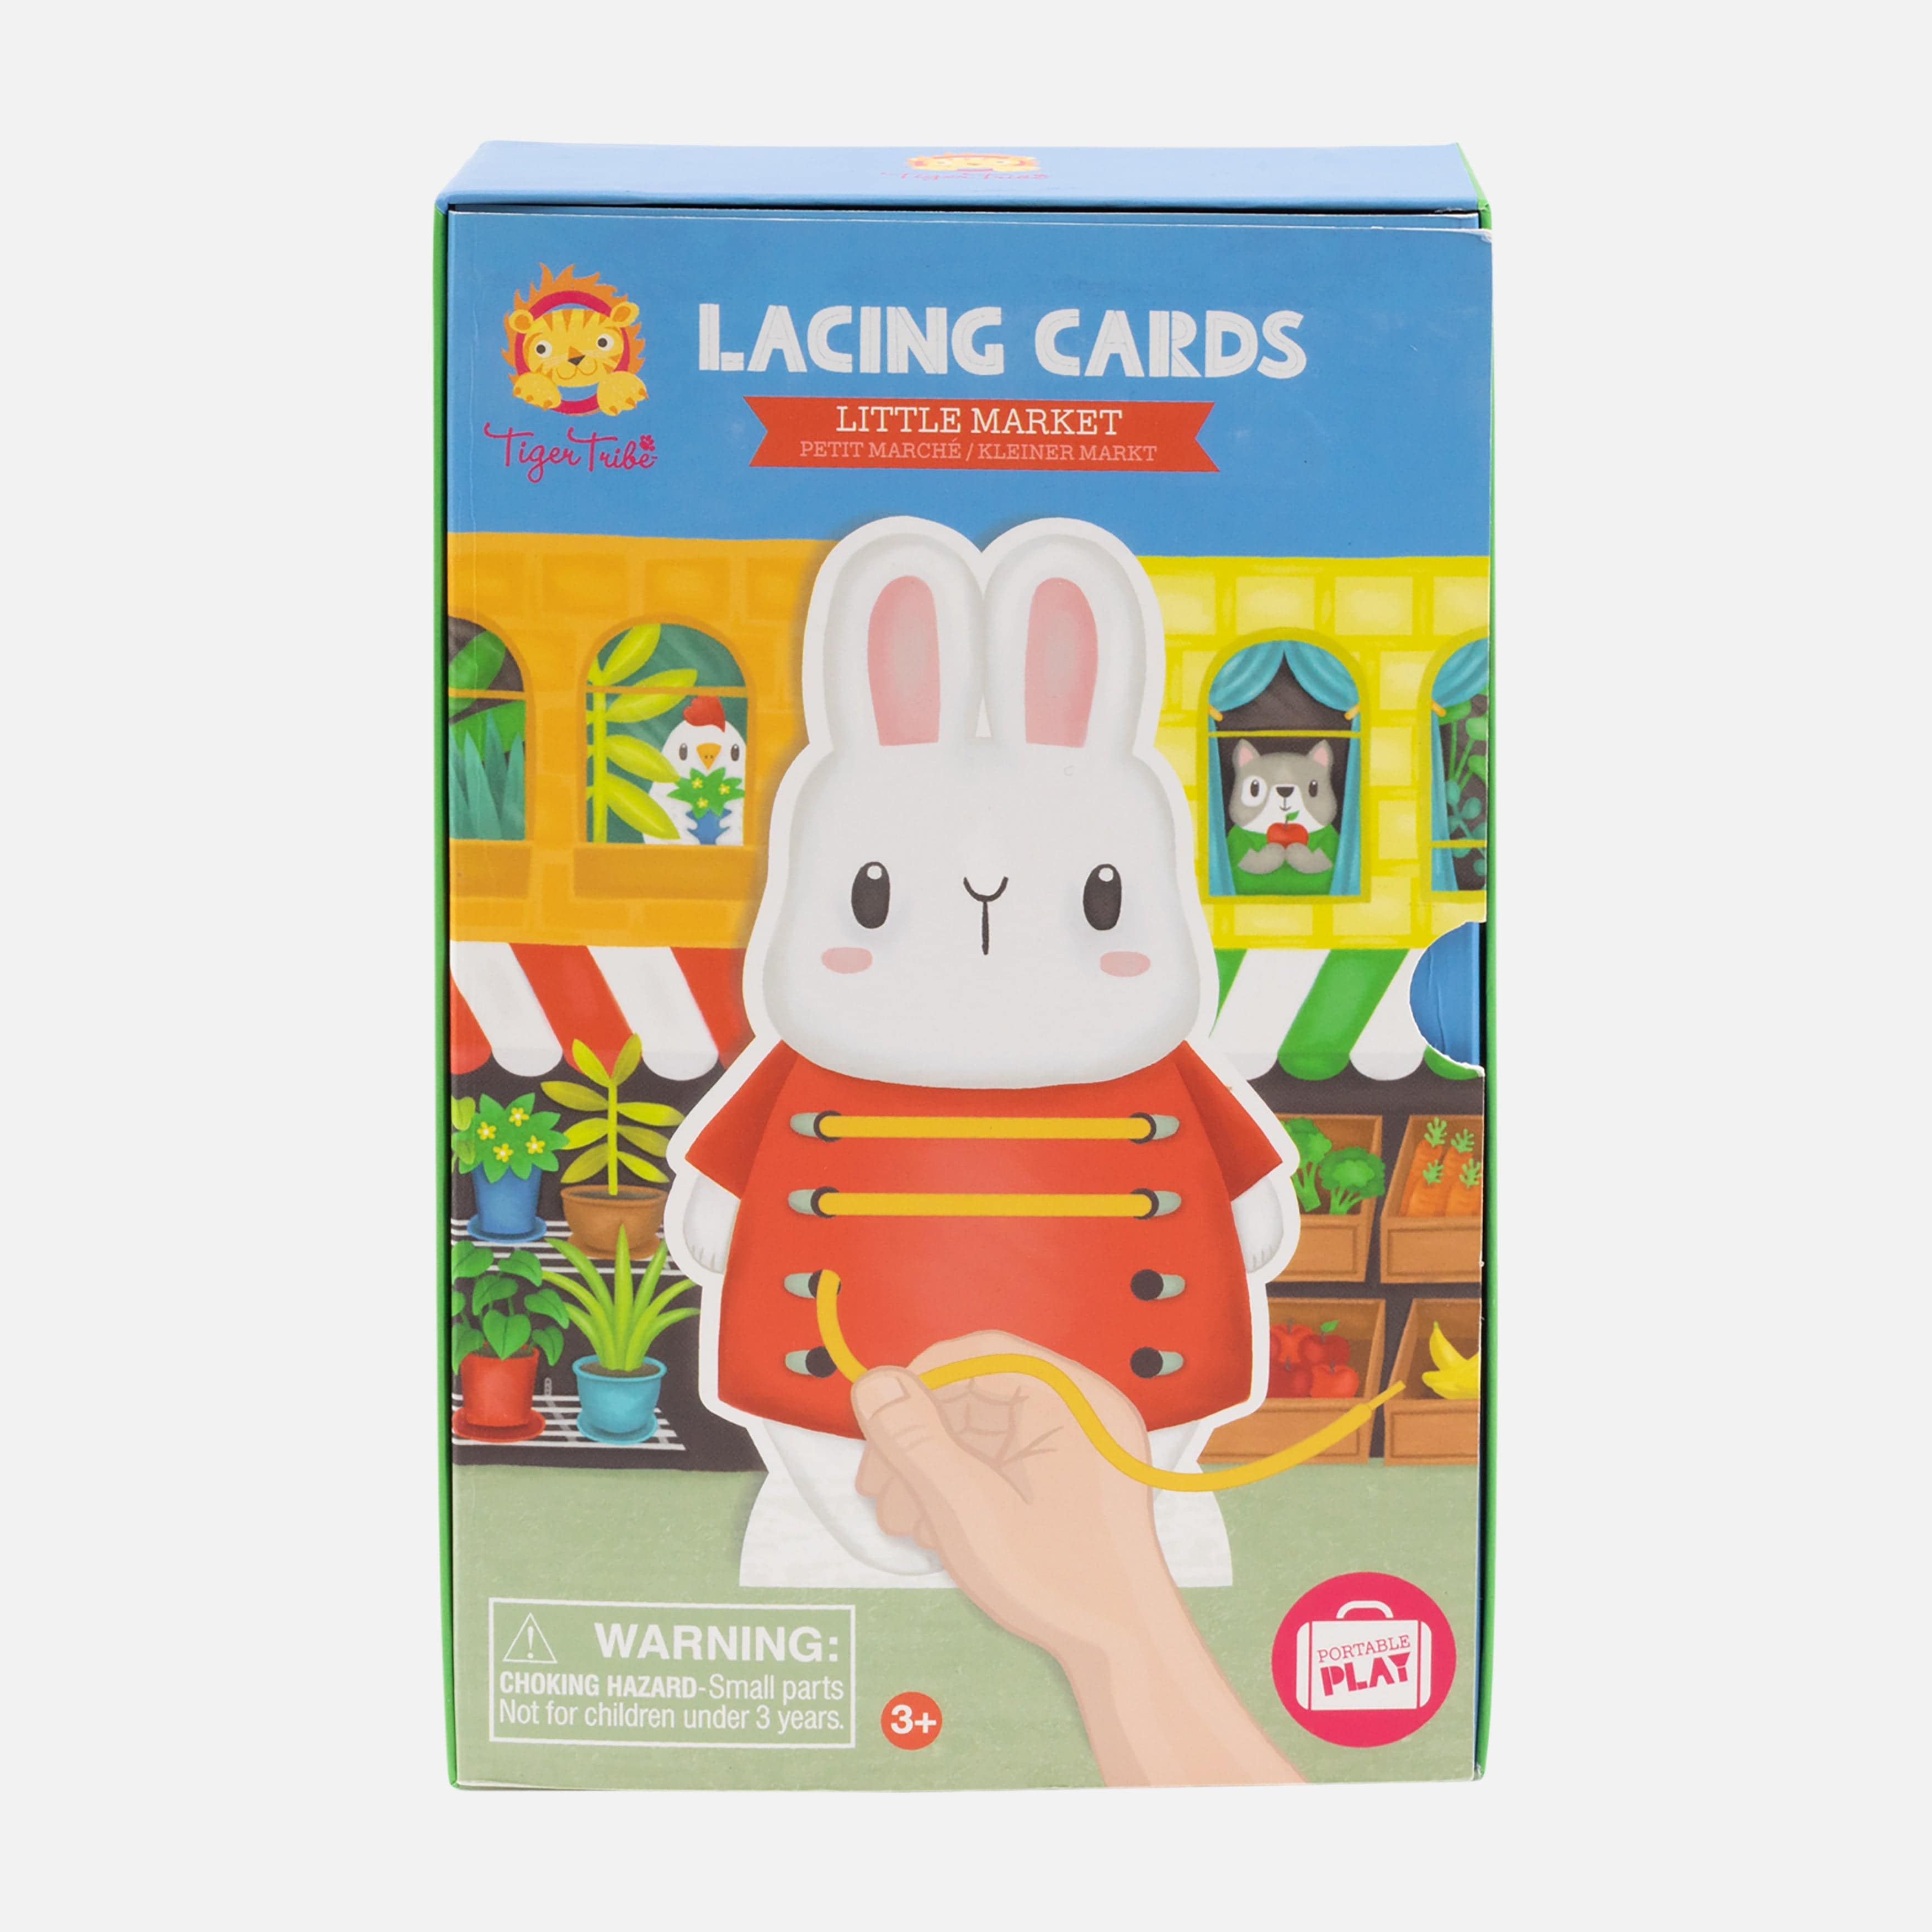 Tiger Tribe Toys Lacing Cards - Little Market